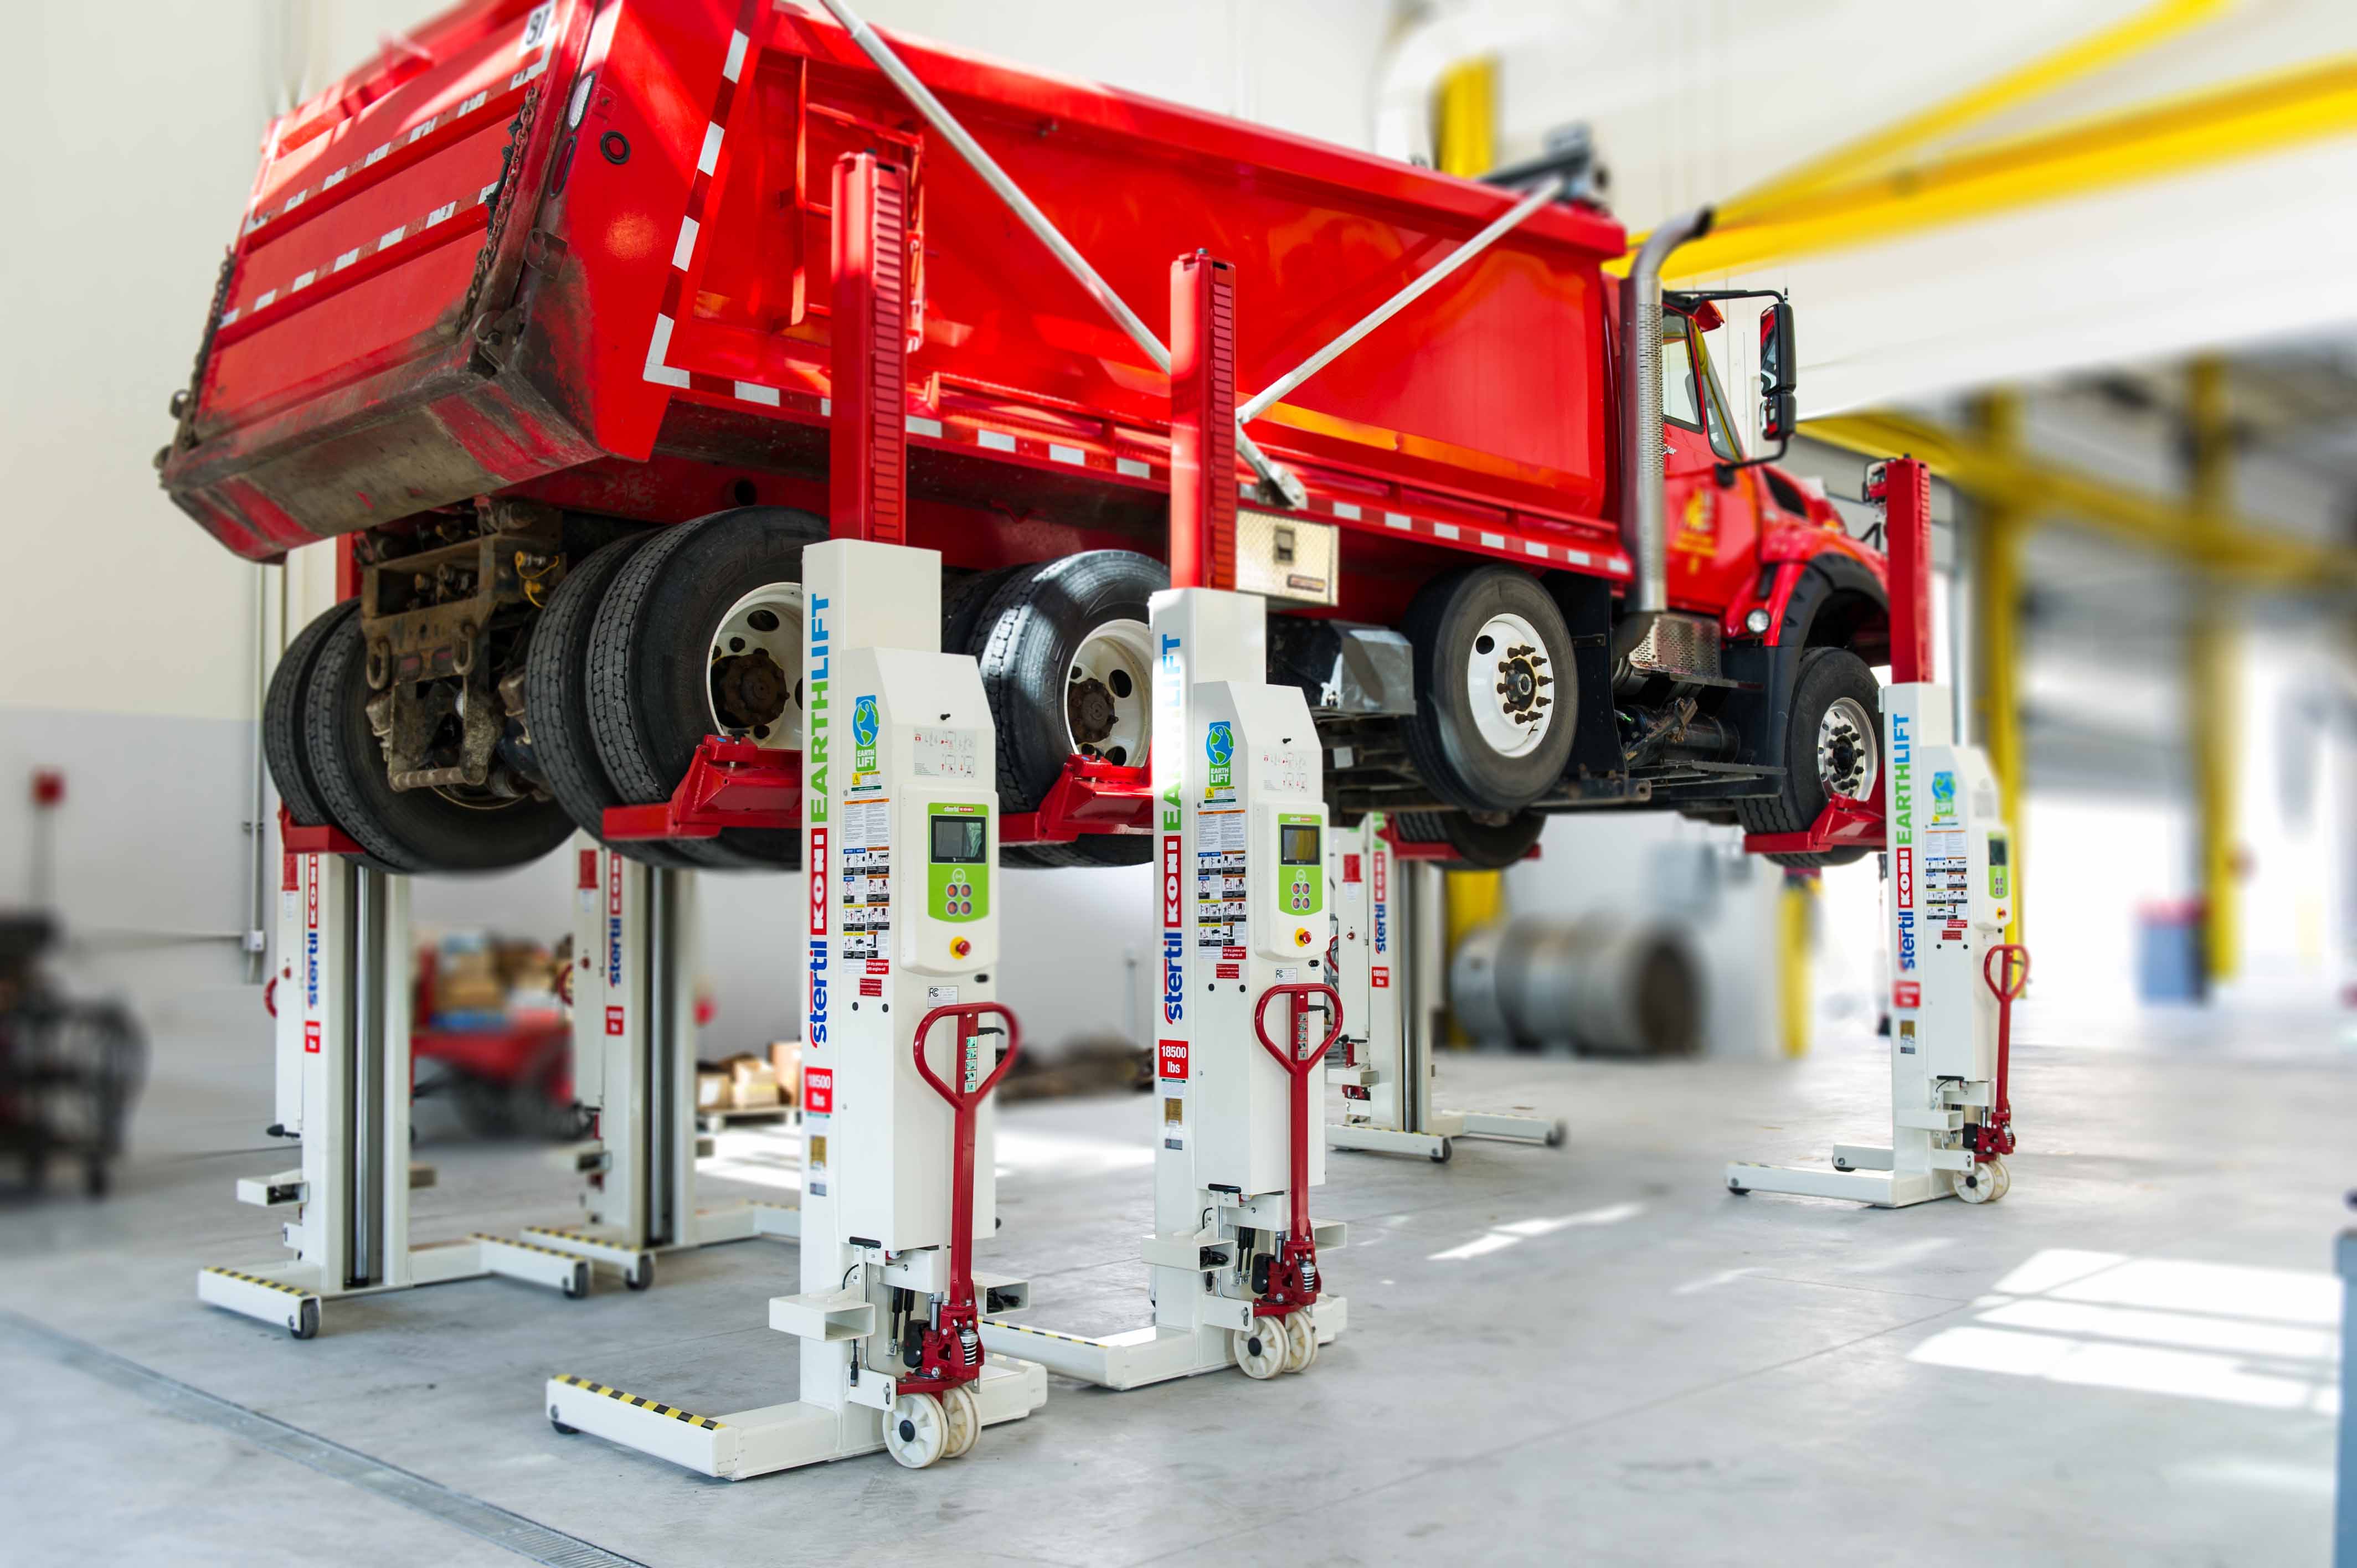 Wireless mobile column lifts eliminate tripping hazards and can be quickly moved around the shop floor.